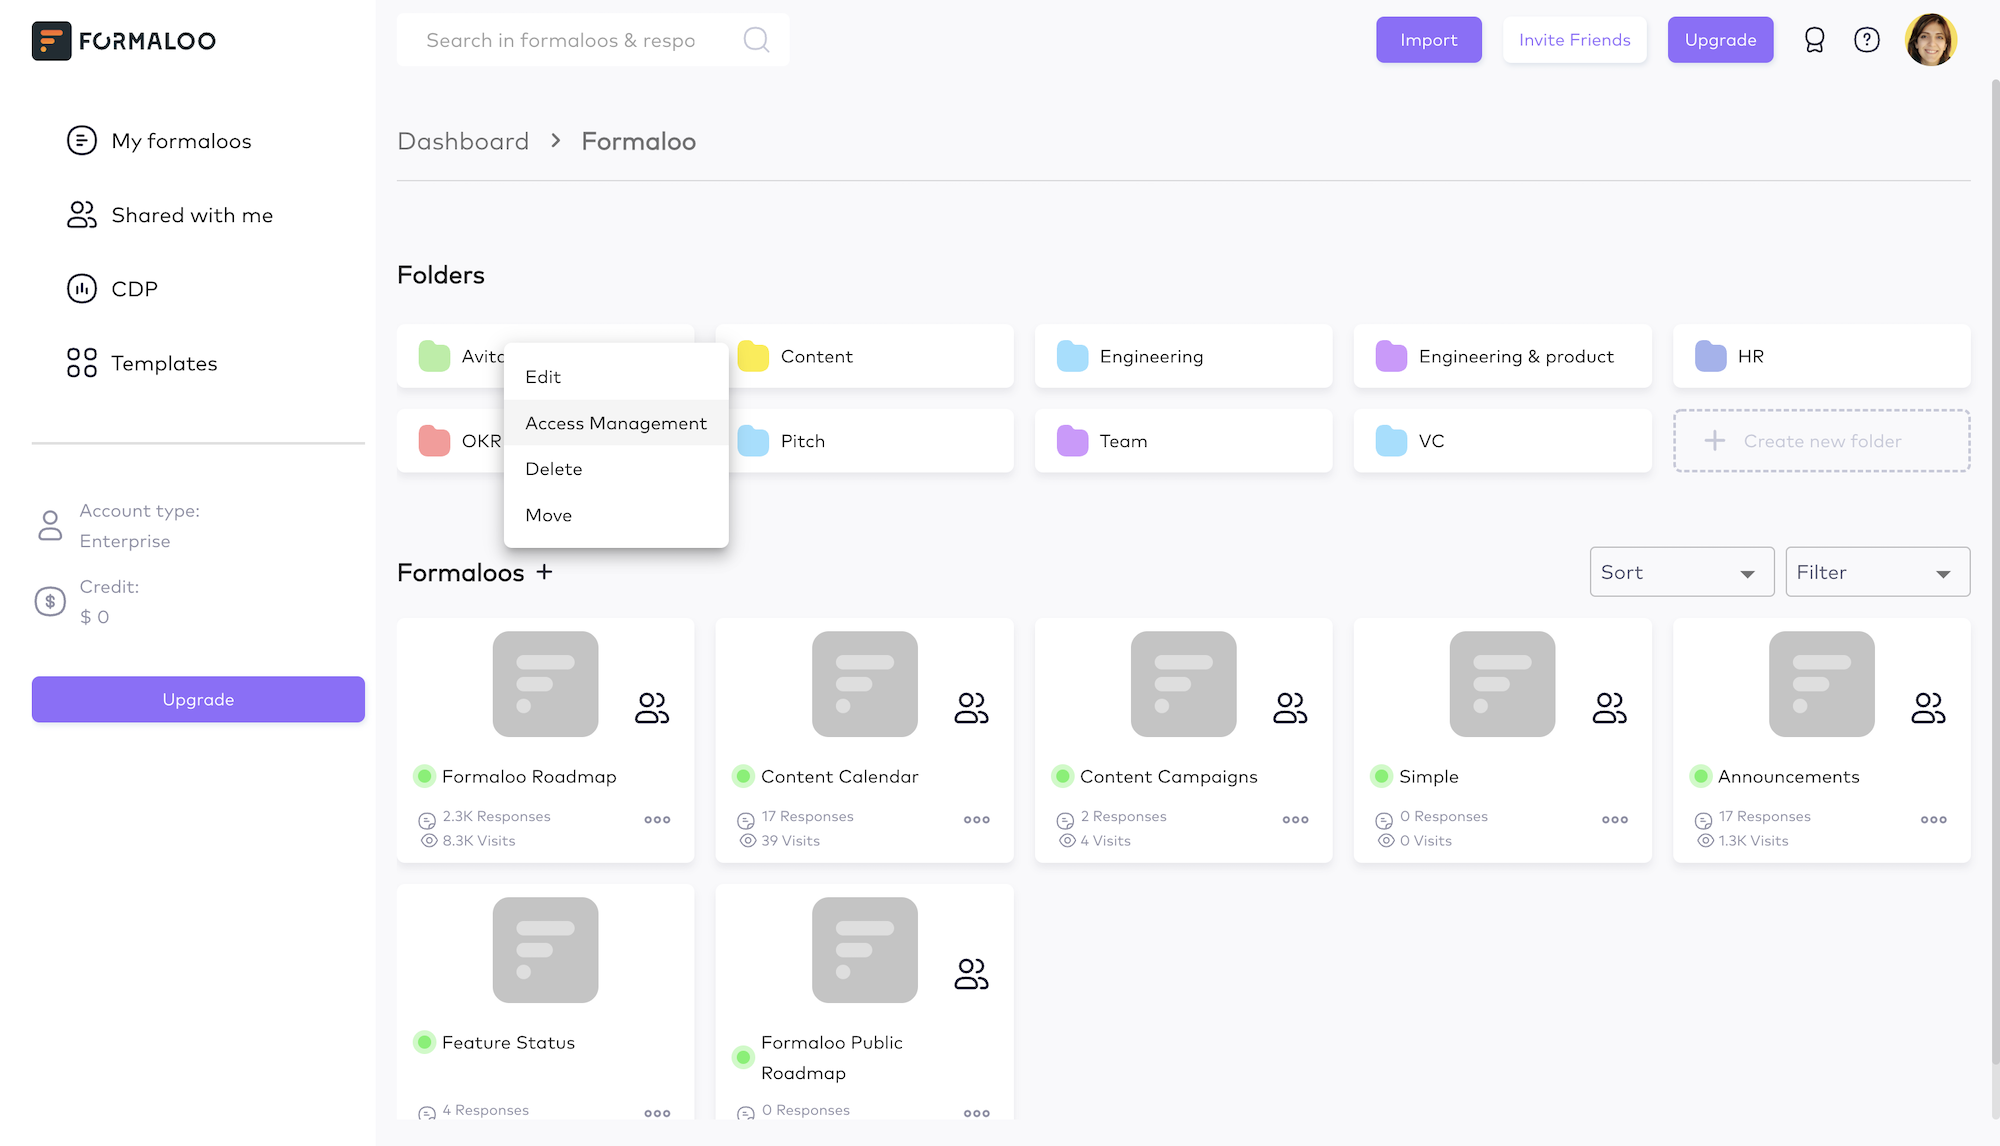 Organize your formaloos with folders and manage your team's access